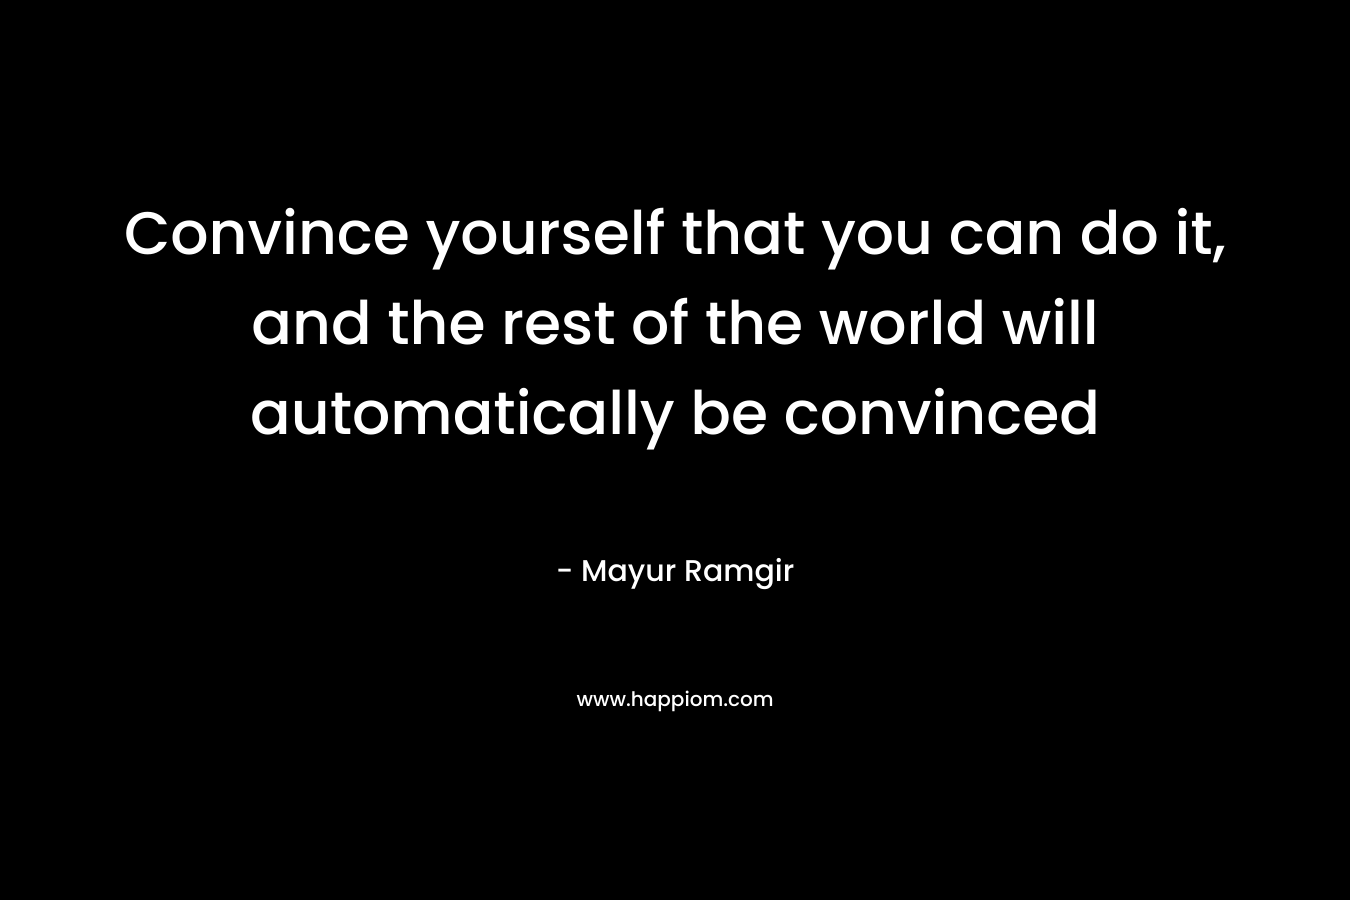 Convince yourself that you can do it, and the rest of the world will automatically be convinced